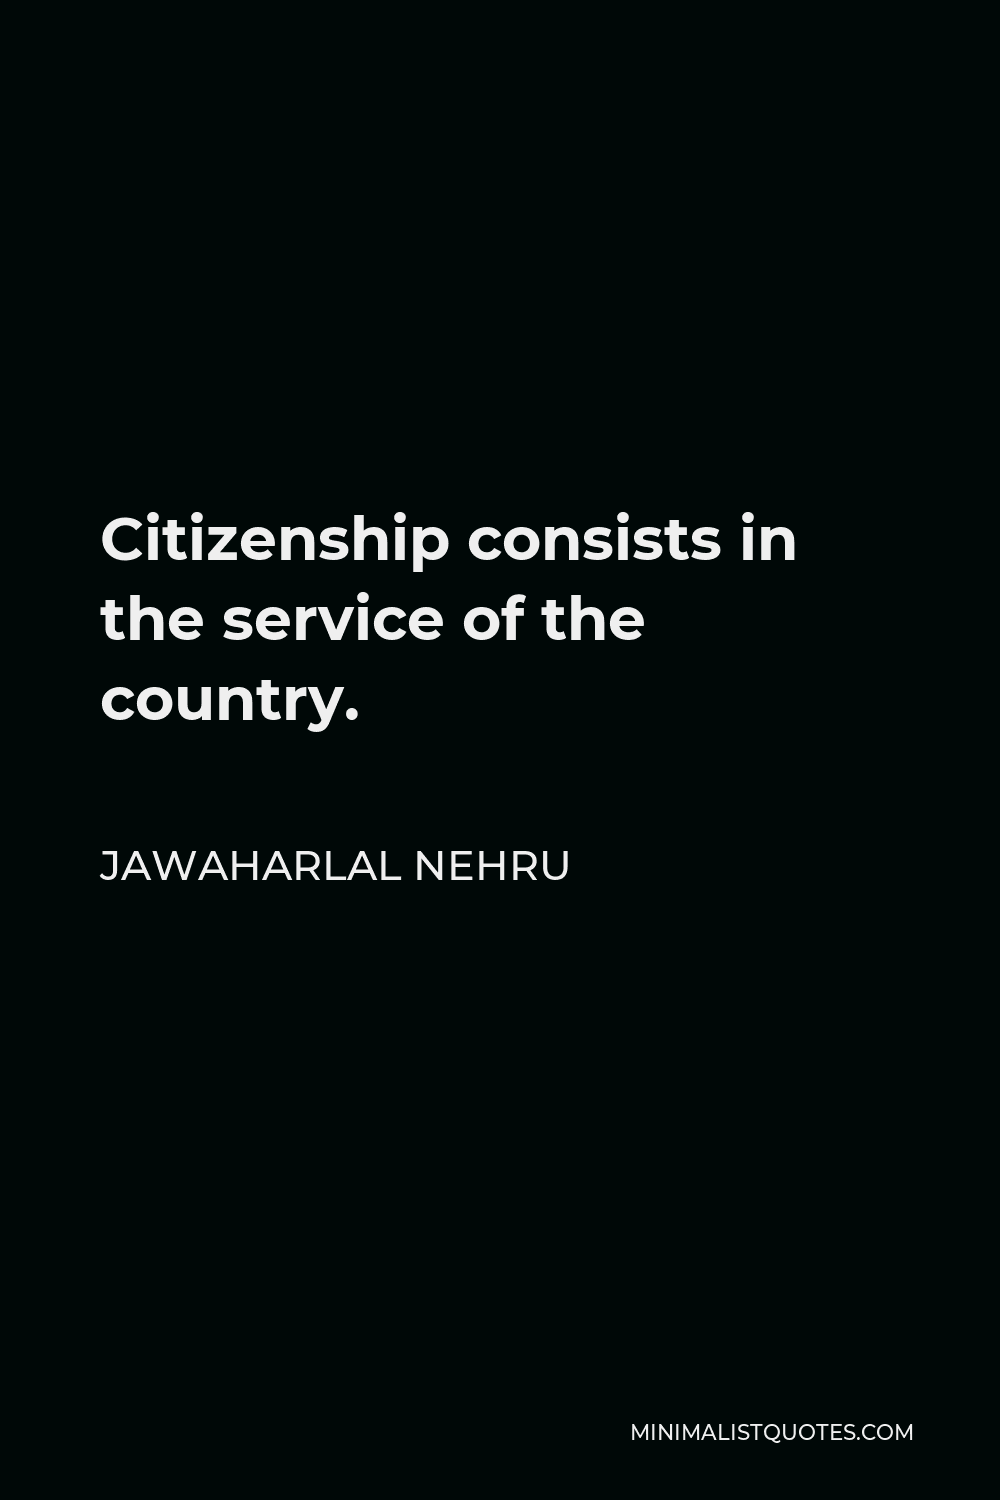 Jawaharlal Nehru Quote - Citizenship consists in the service of the country.